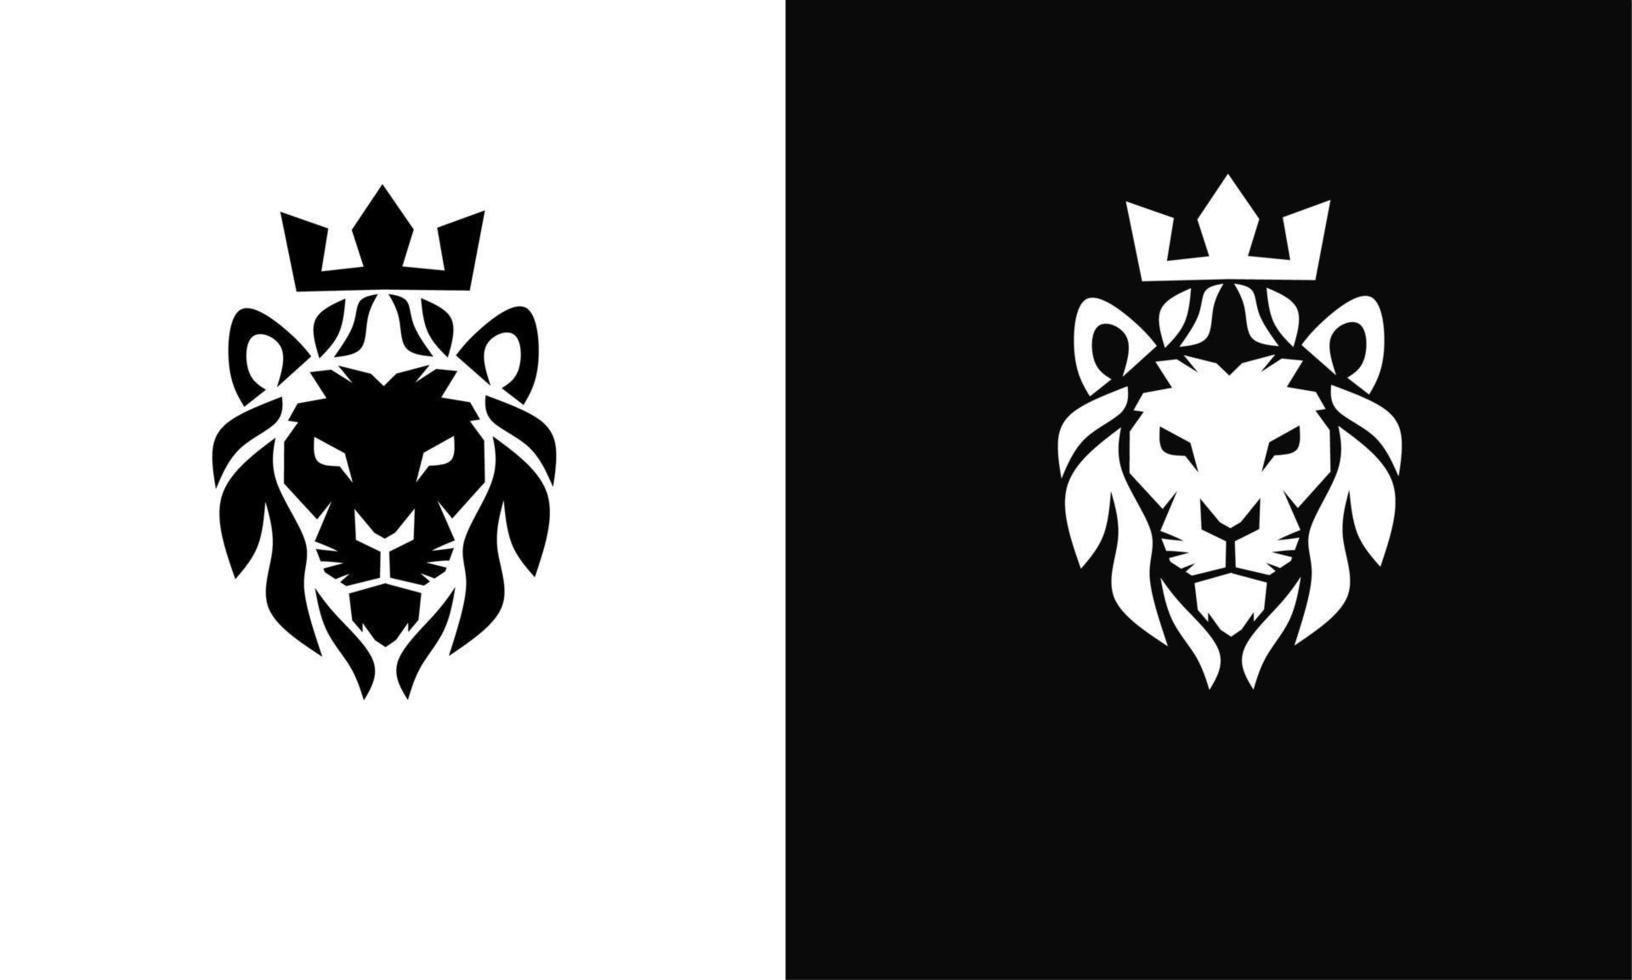 Template logo head face lion used crown white and black color vector